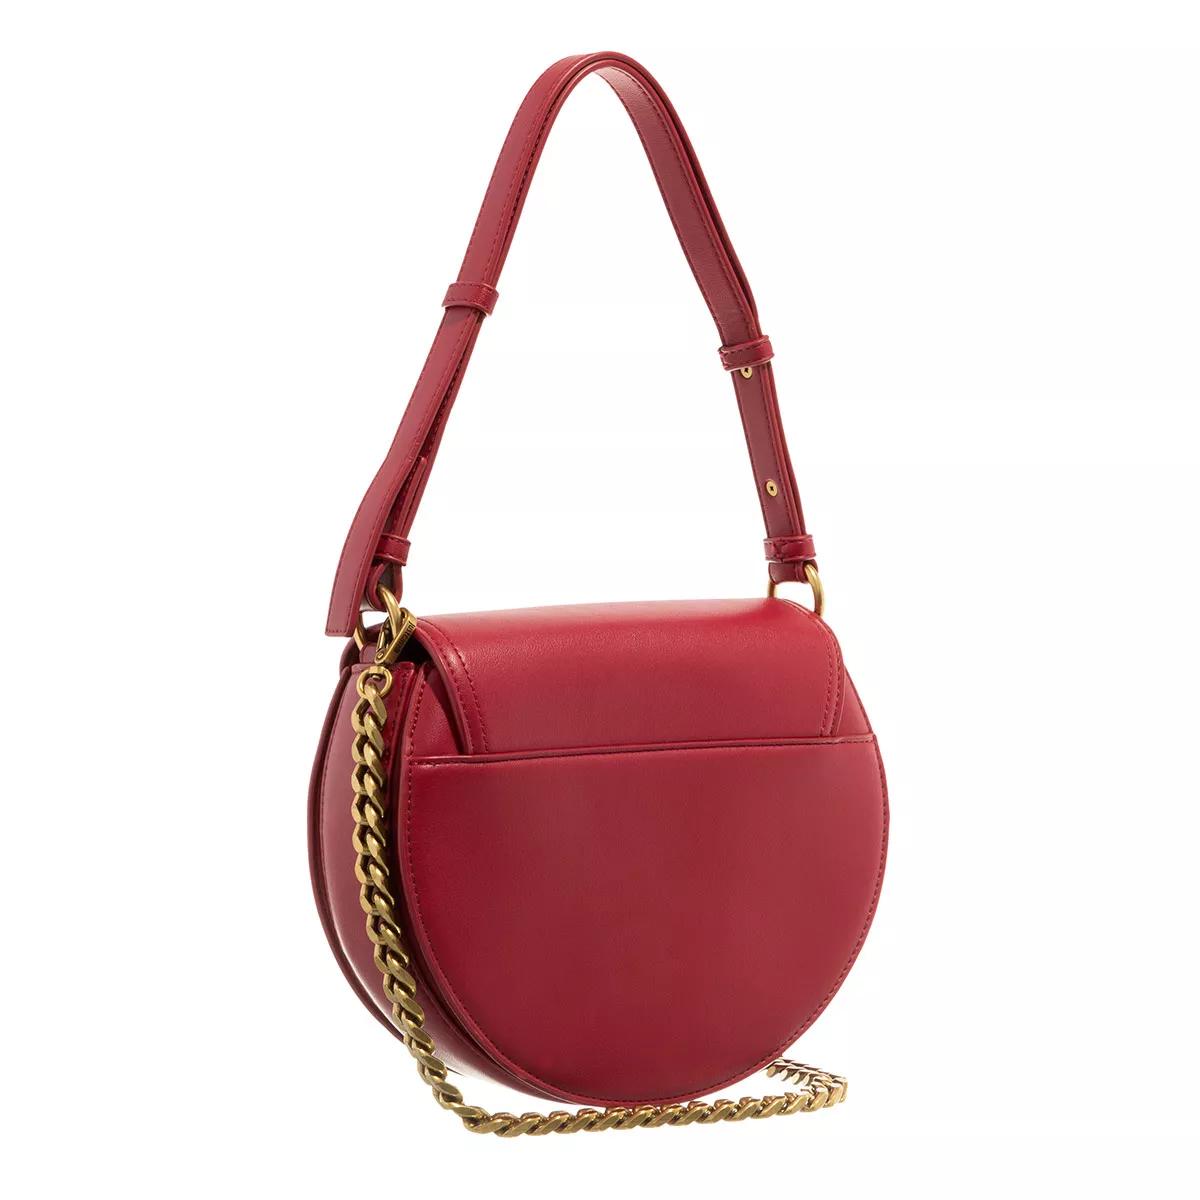 Just Cavalli Totes Range A Icon Bag Sketch 1 Bags in rood